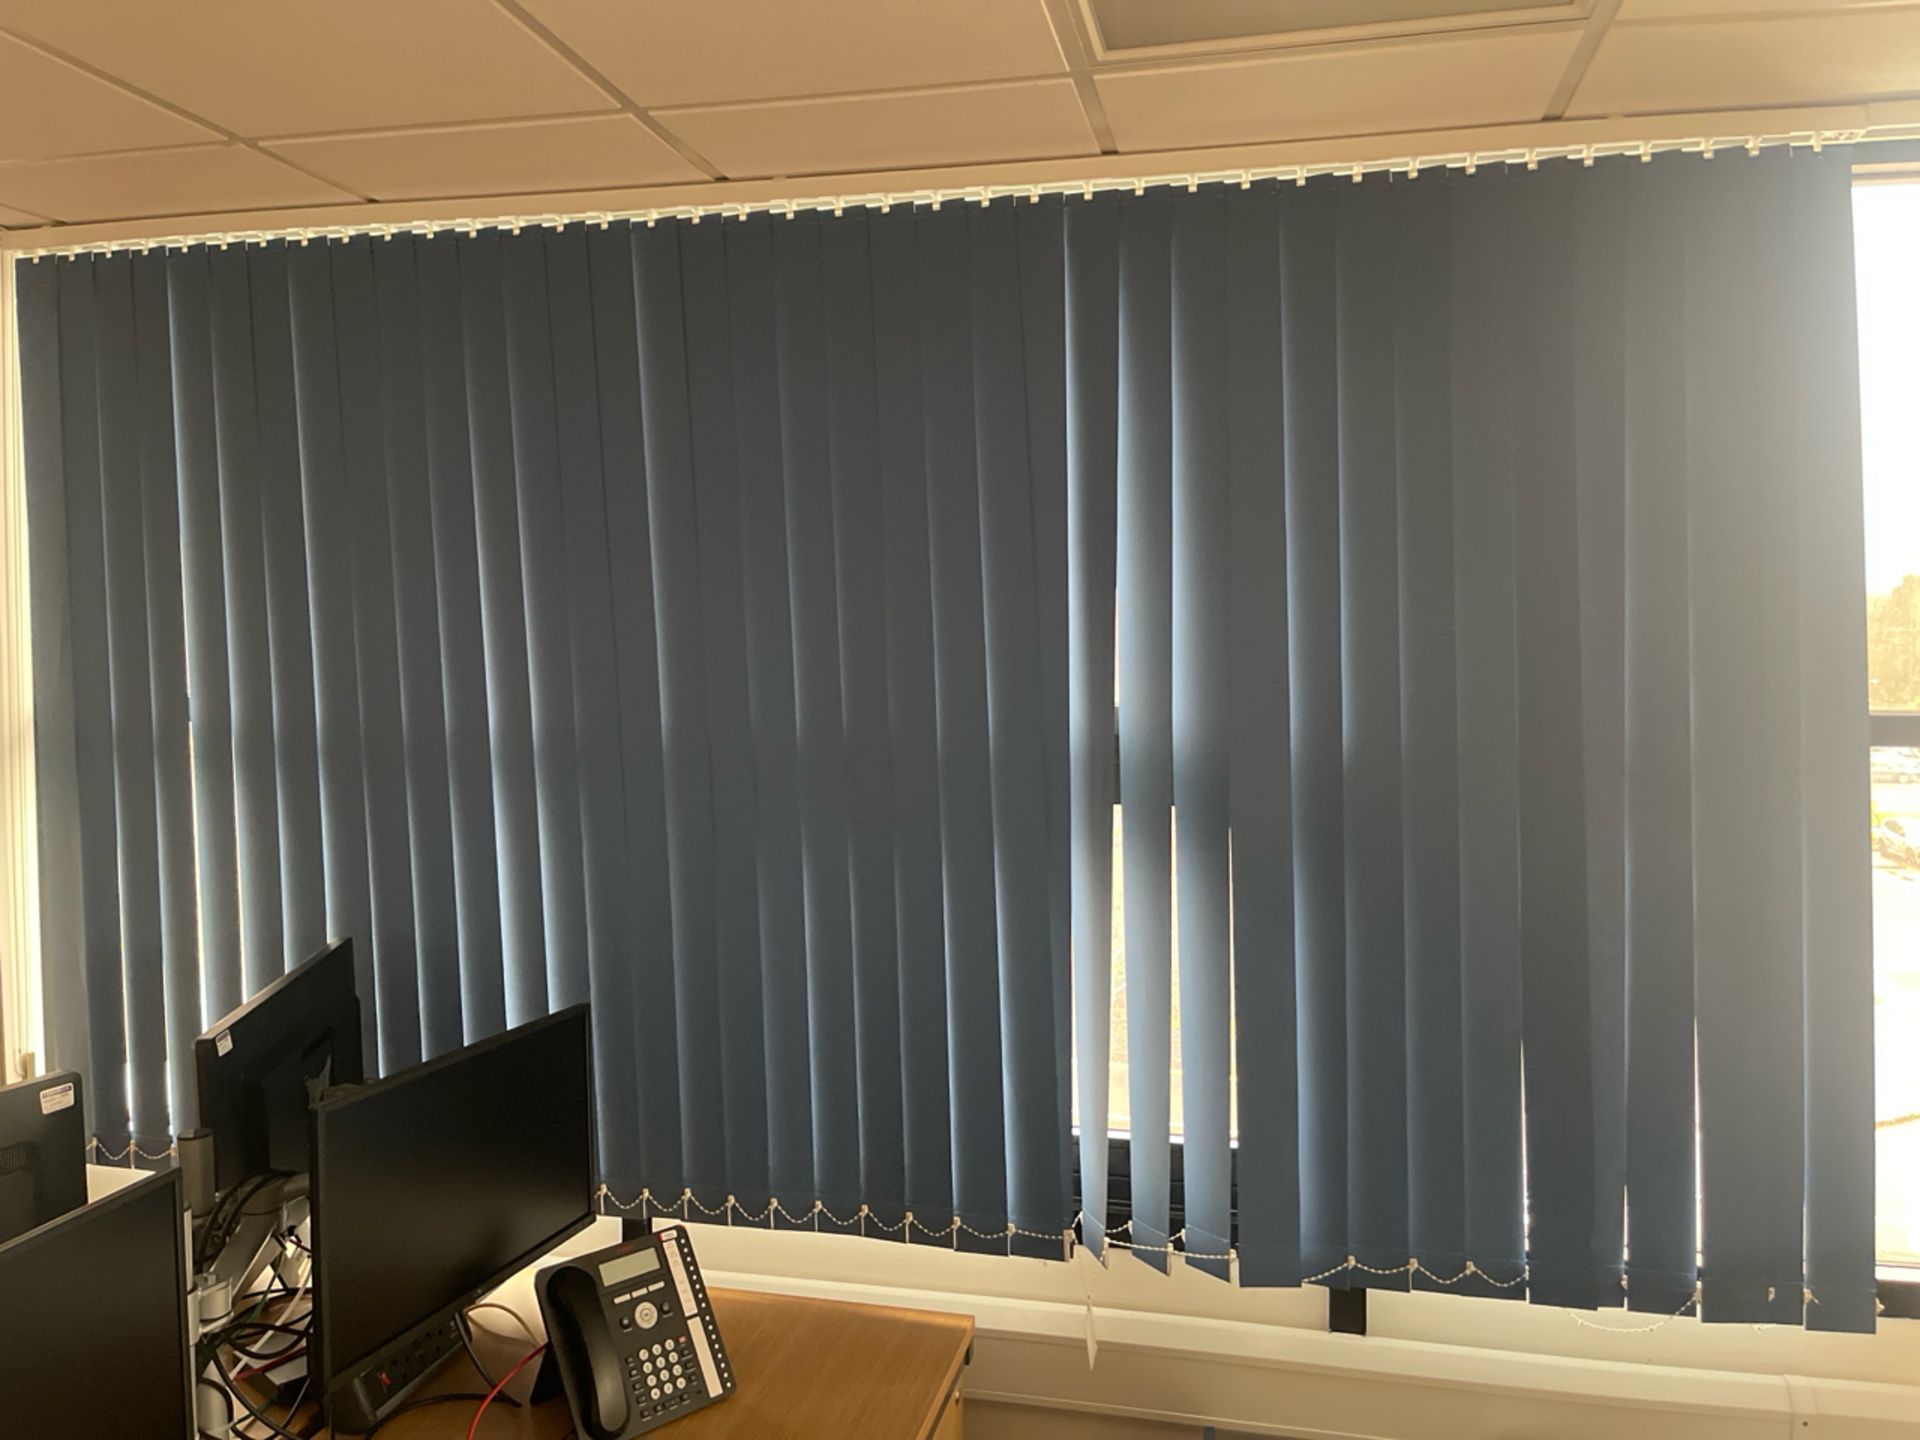 18m Of Blinds - Image 4 of 5